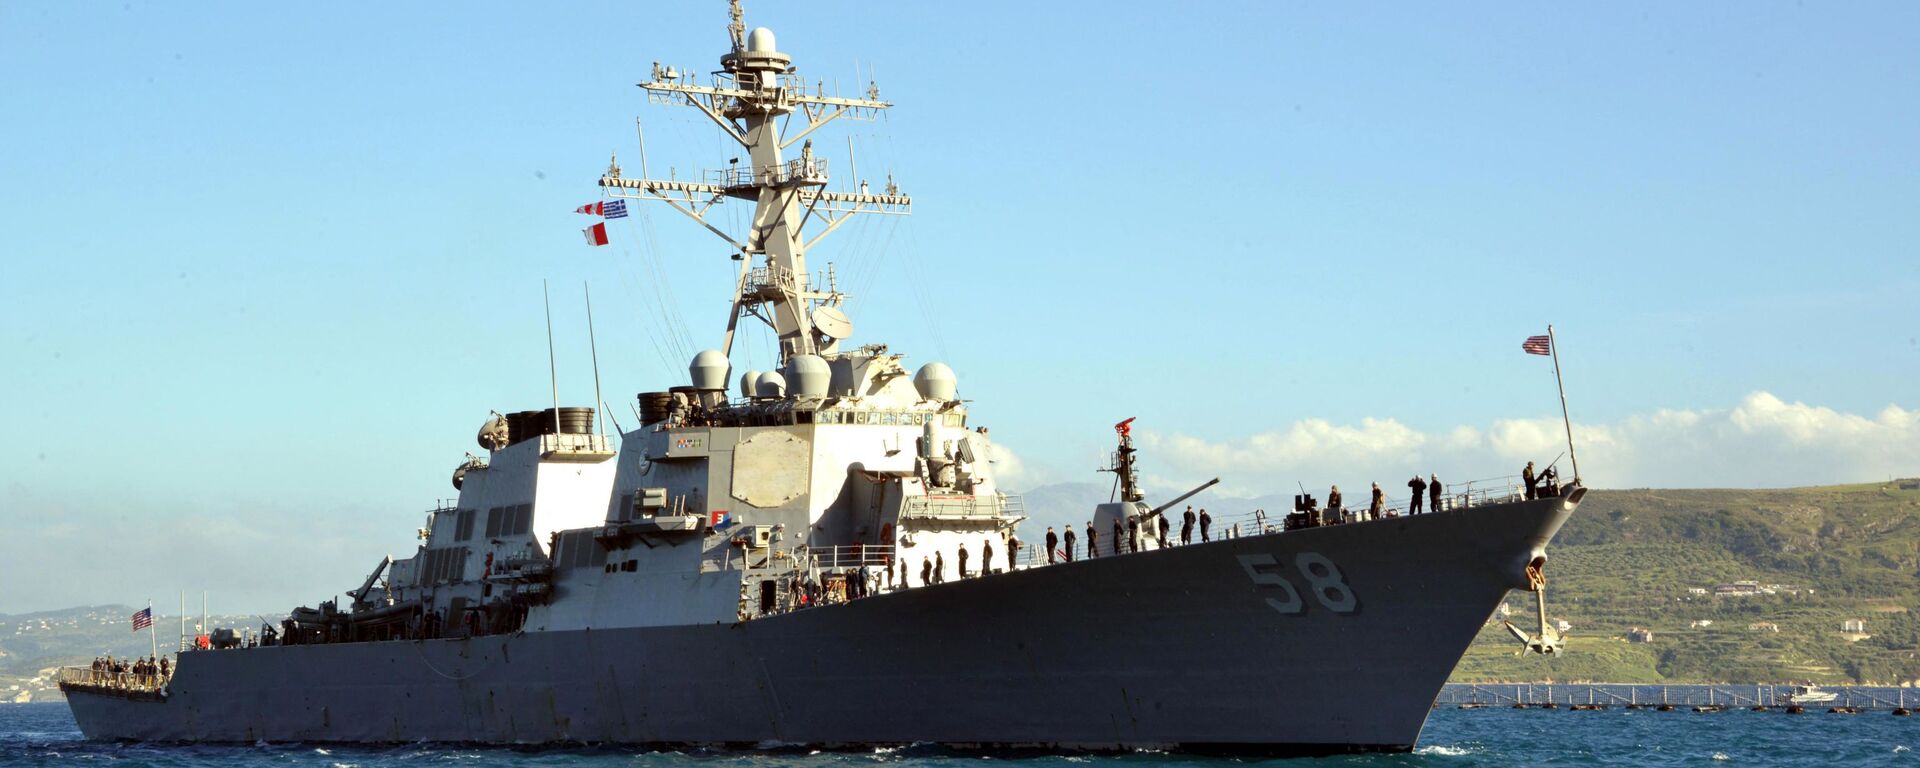 In this April 29, 2015 US Navy handout photo, the guided-missile destroyer USS Laboon (DDG 58) arrives in Souda Bay, Greece on April 29, 2015 for a scheduled port visit.  - Sputnik International, 1920, 16.10.2021